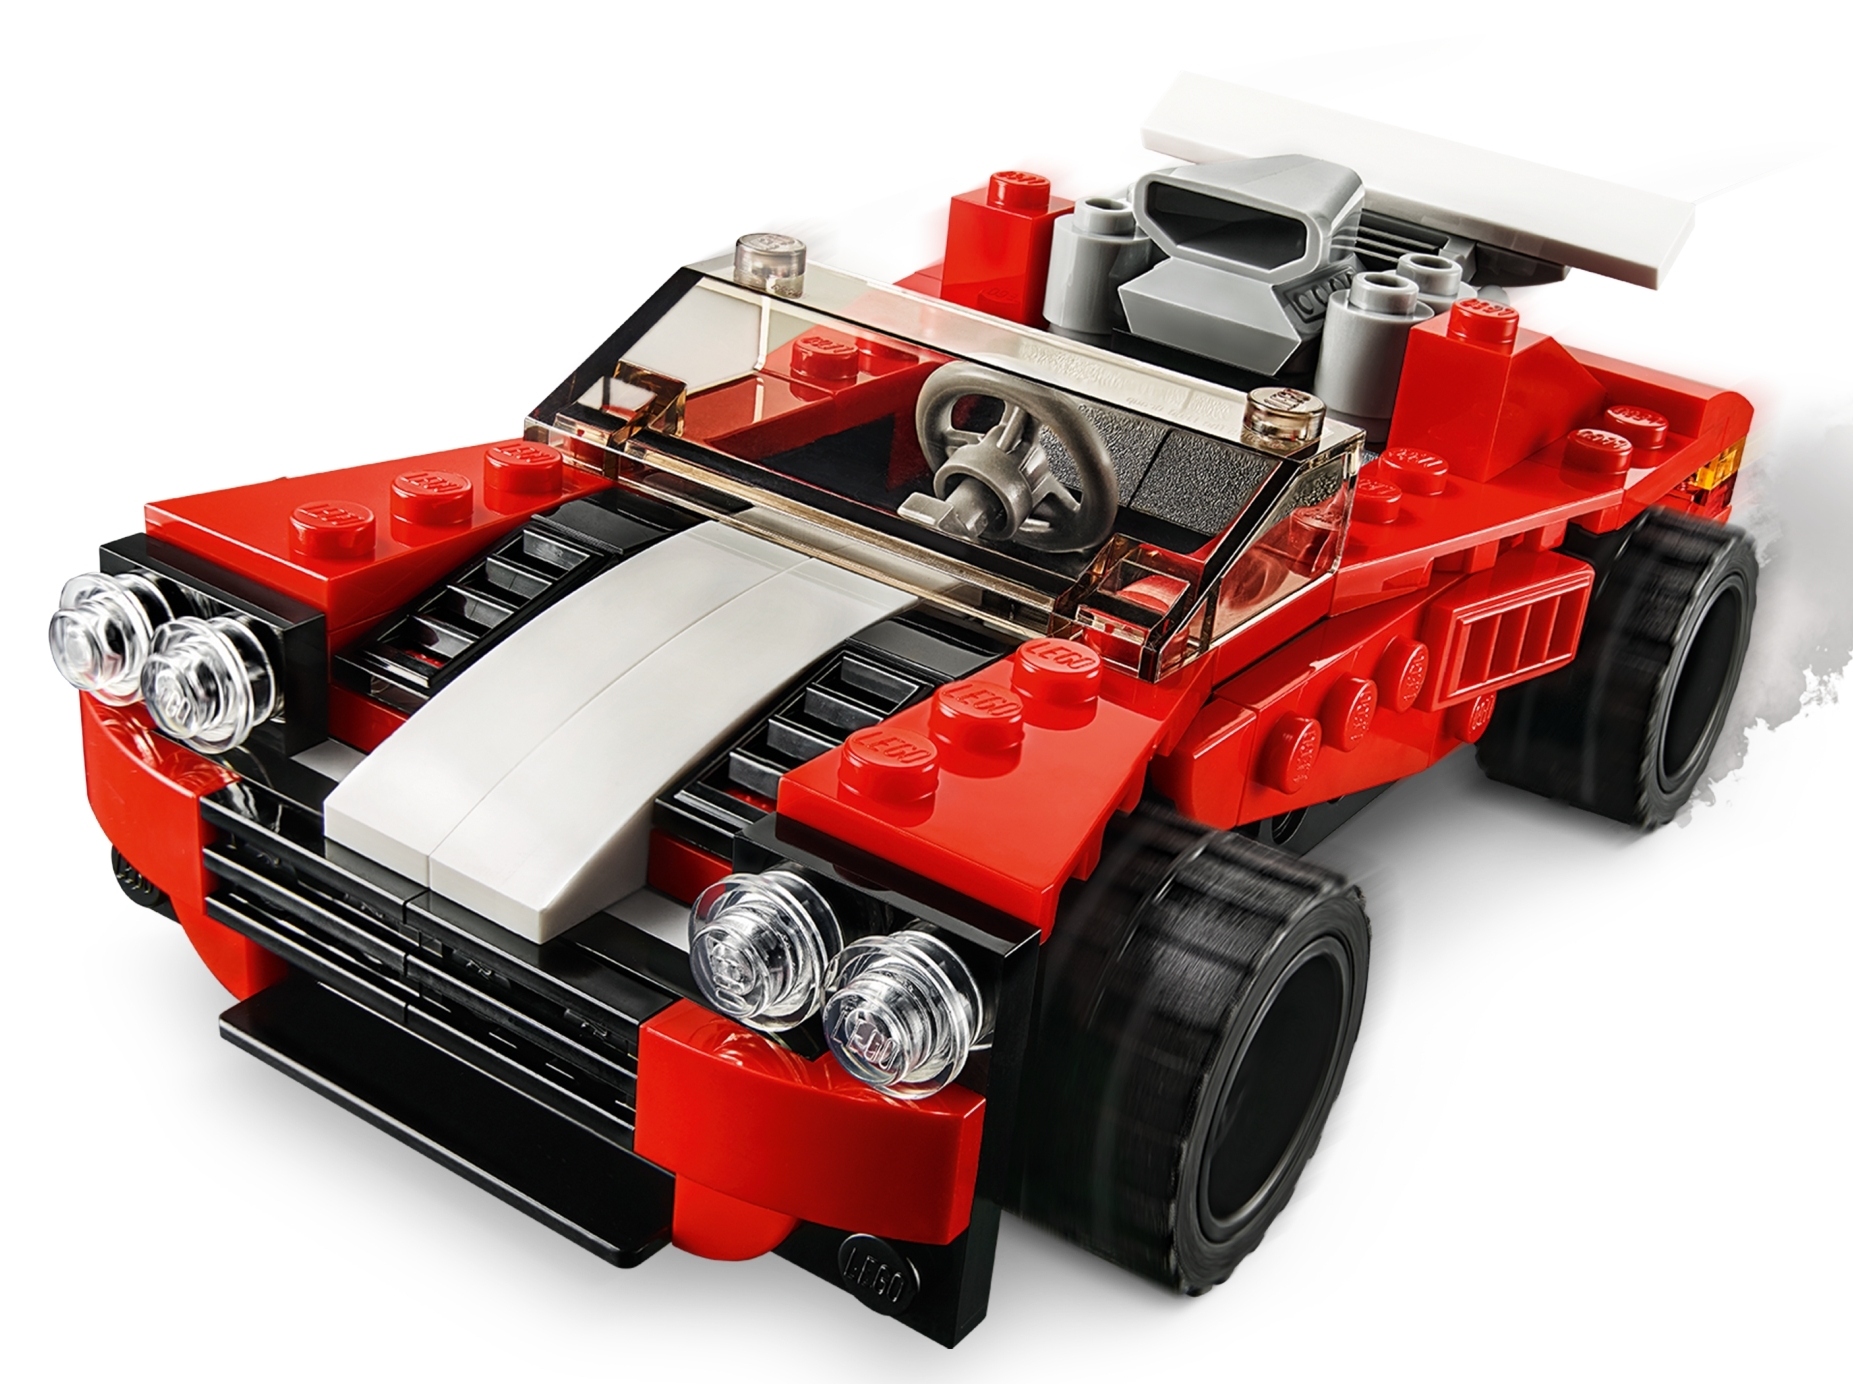 134 Pieces New 2020 LEGO Creator 3in1 Sports Car Toy 31100 Building Kit